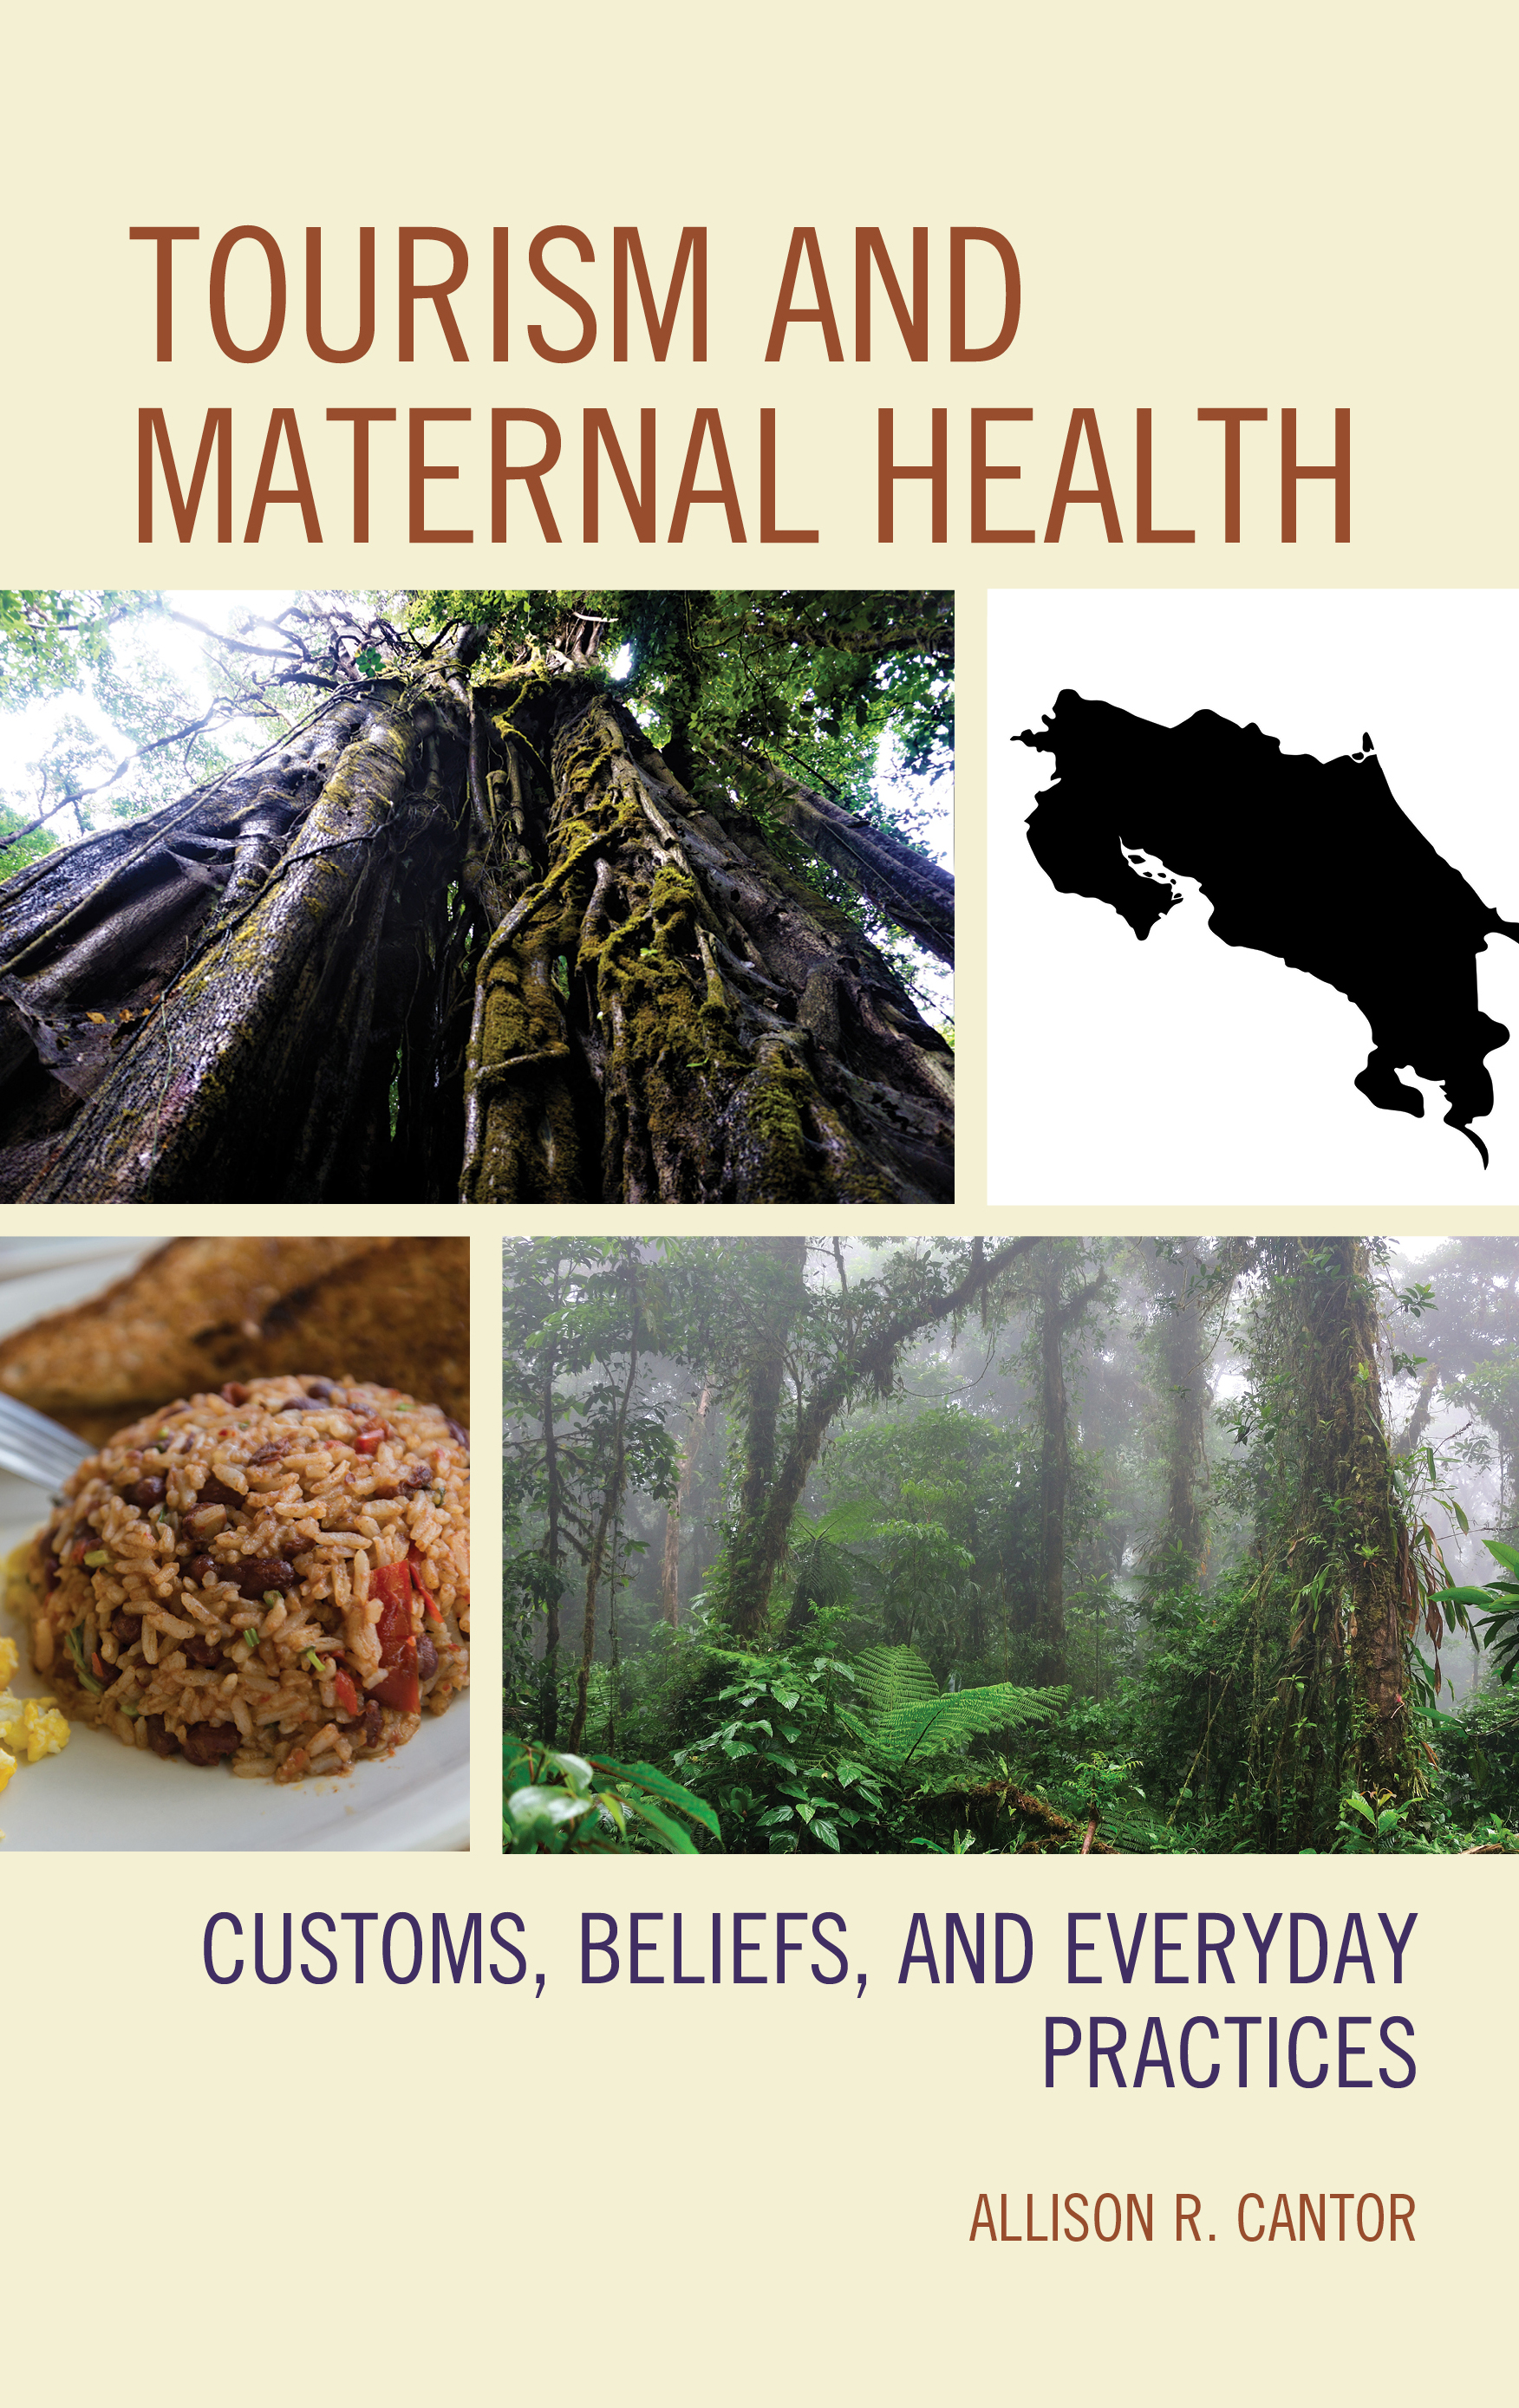 Tourism and Maternal Health: Customs, Beliefs, and Everyday Practices